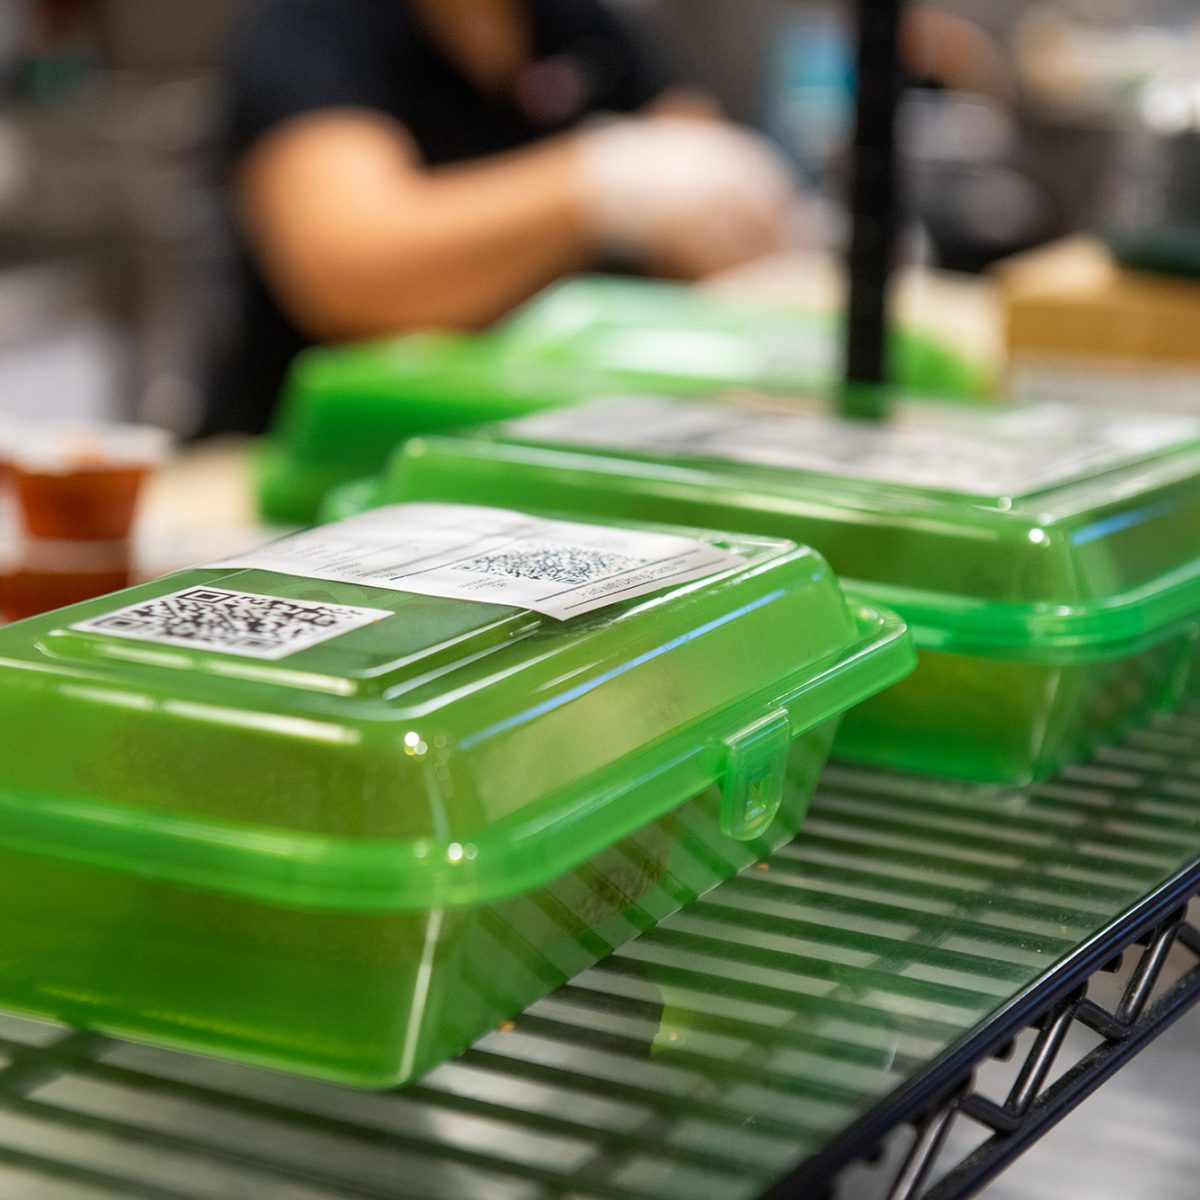 Going Green: Reusable Container Initiative Starts at GSU